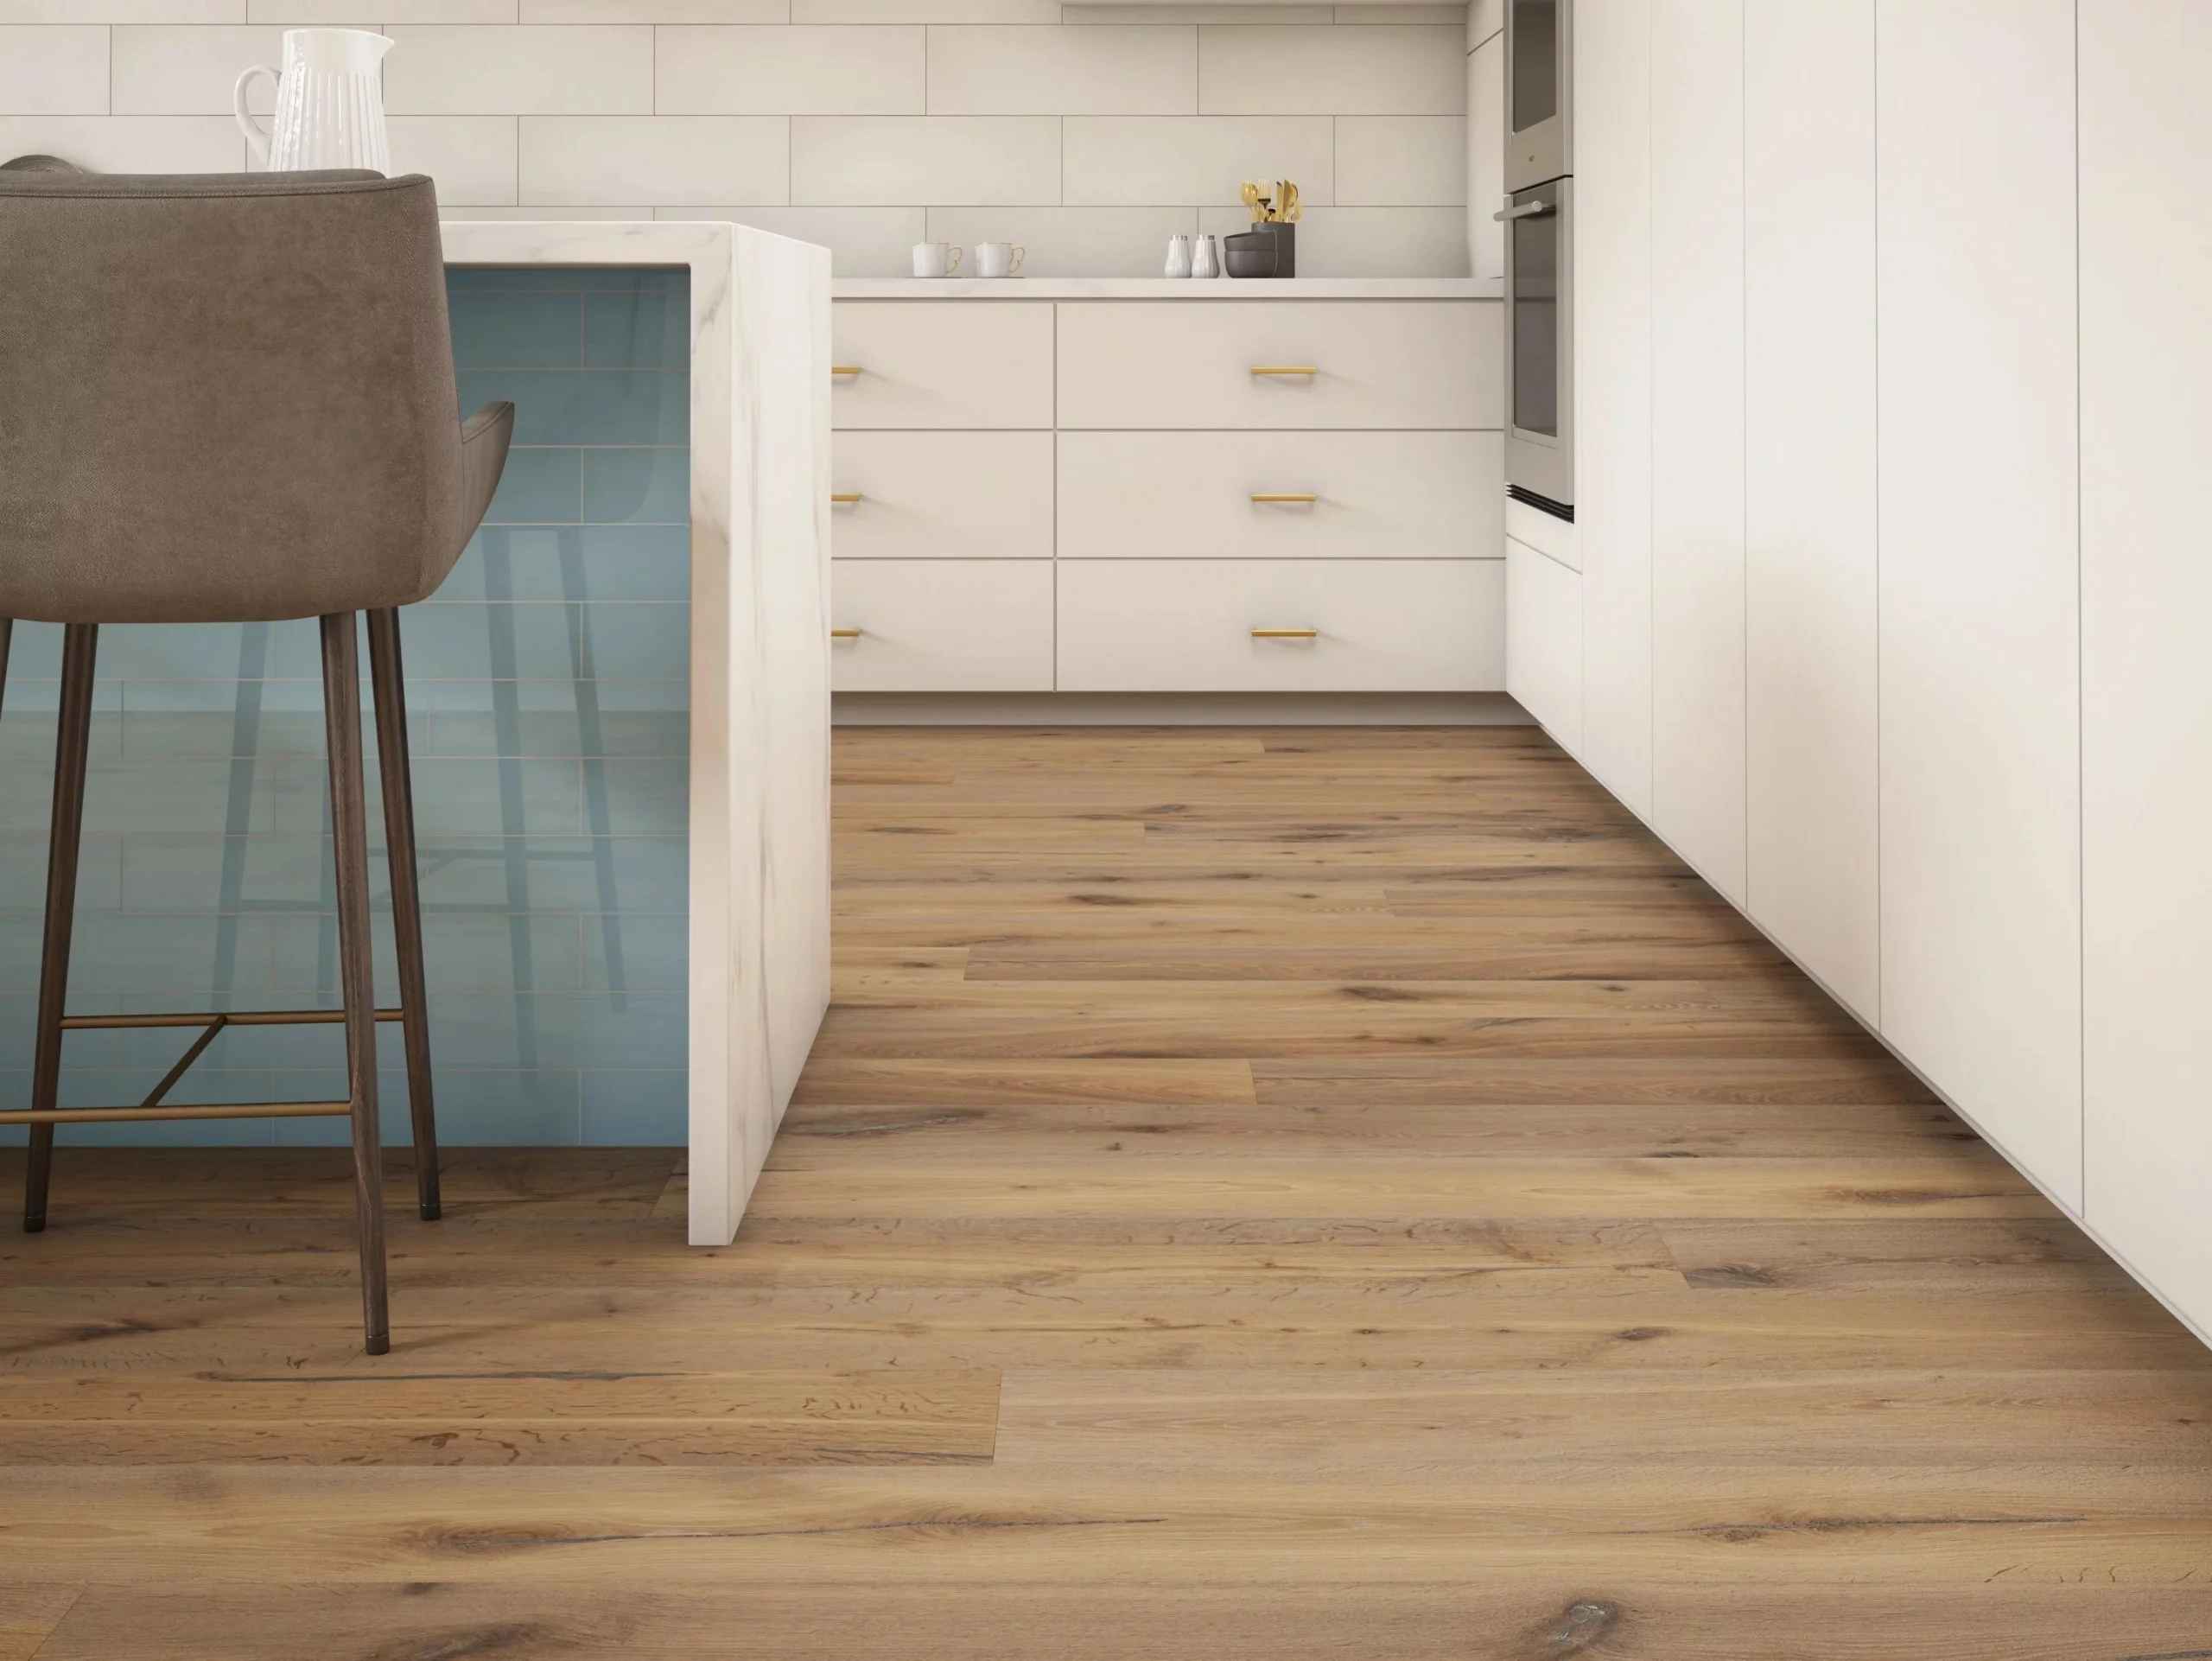 smoked white oak flooring - What are the disadvantages of white oak flooring